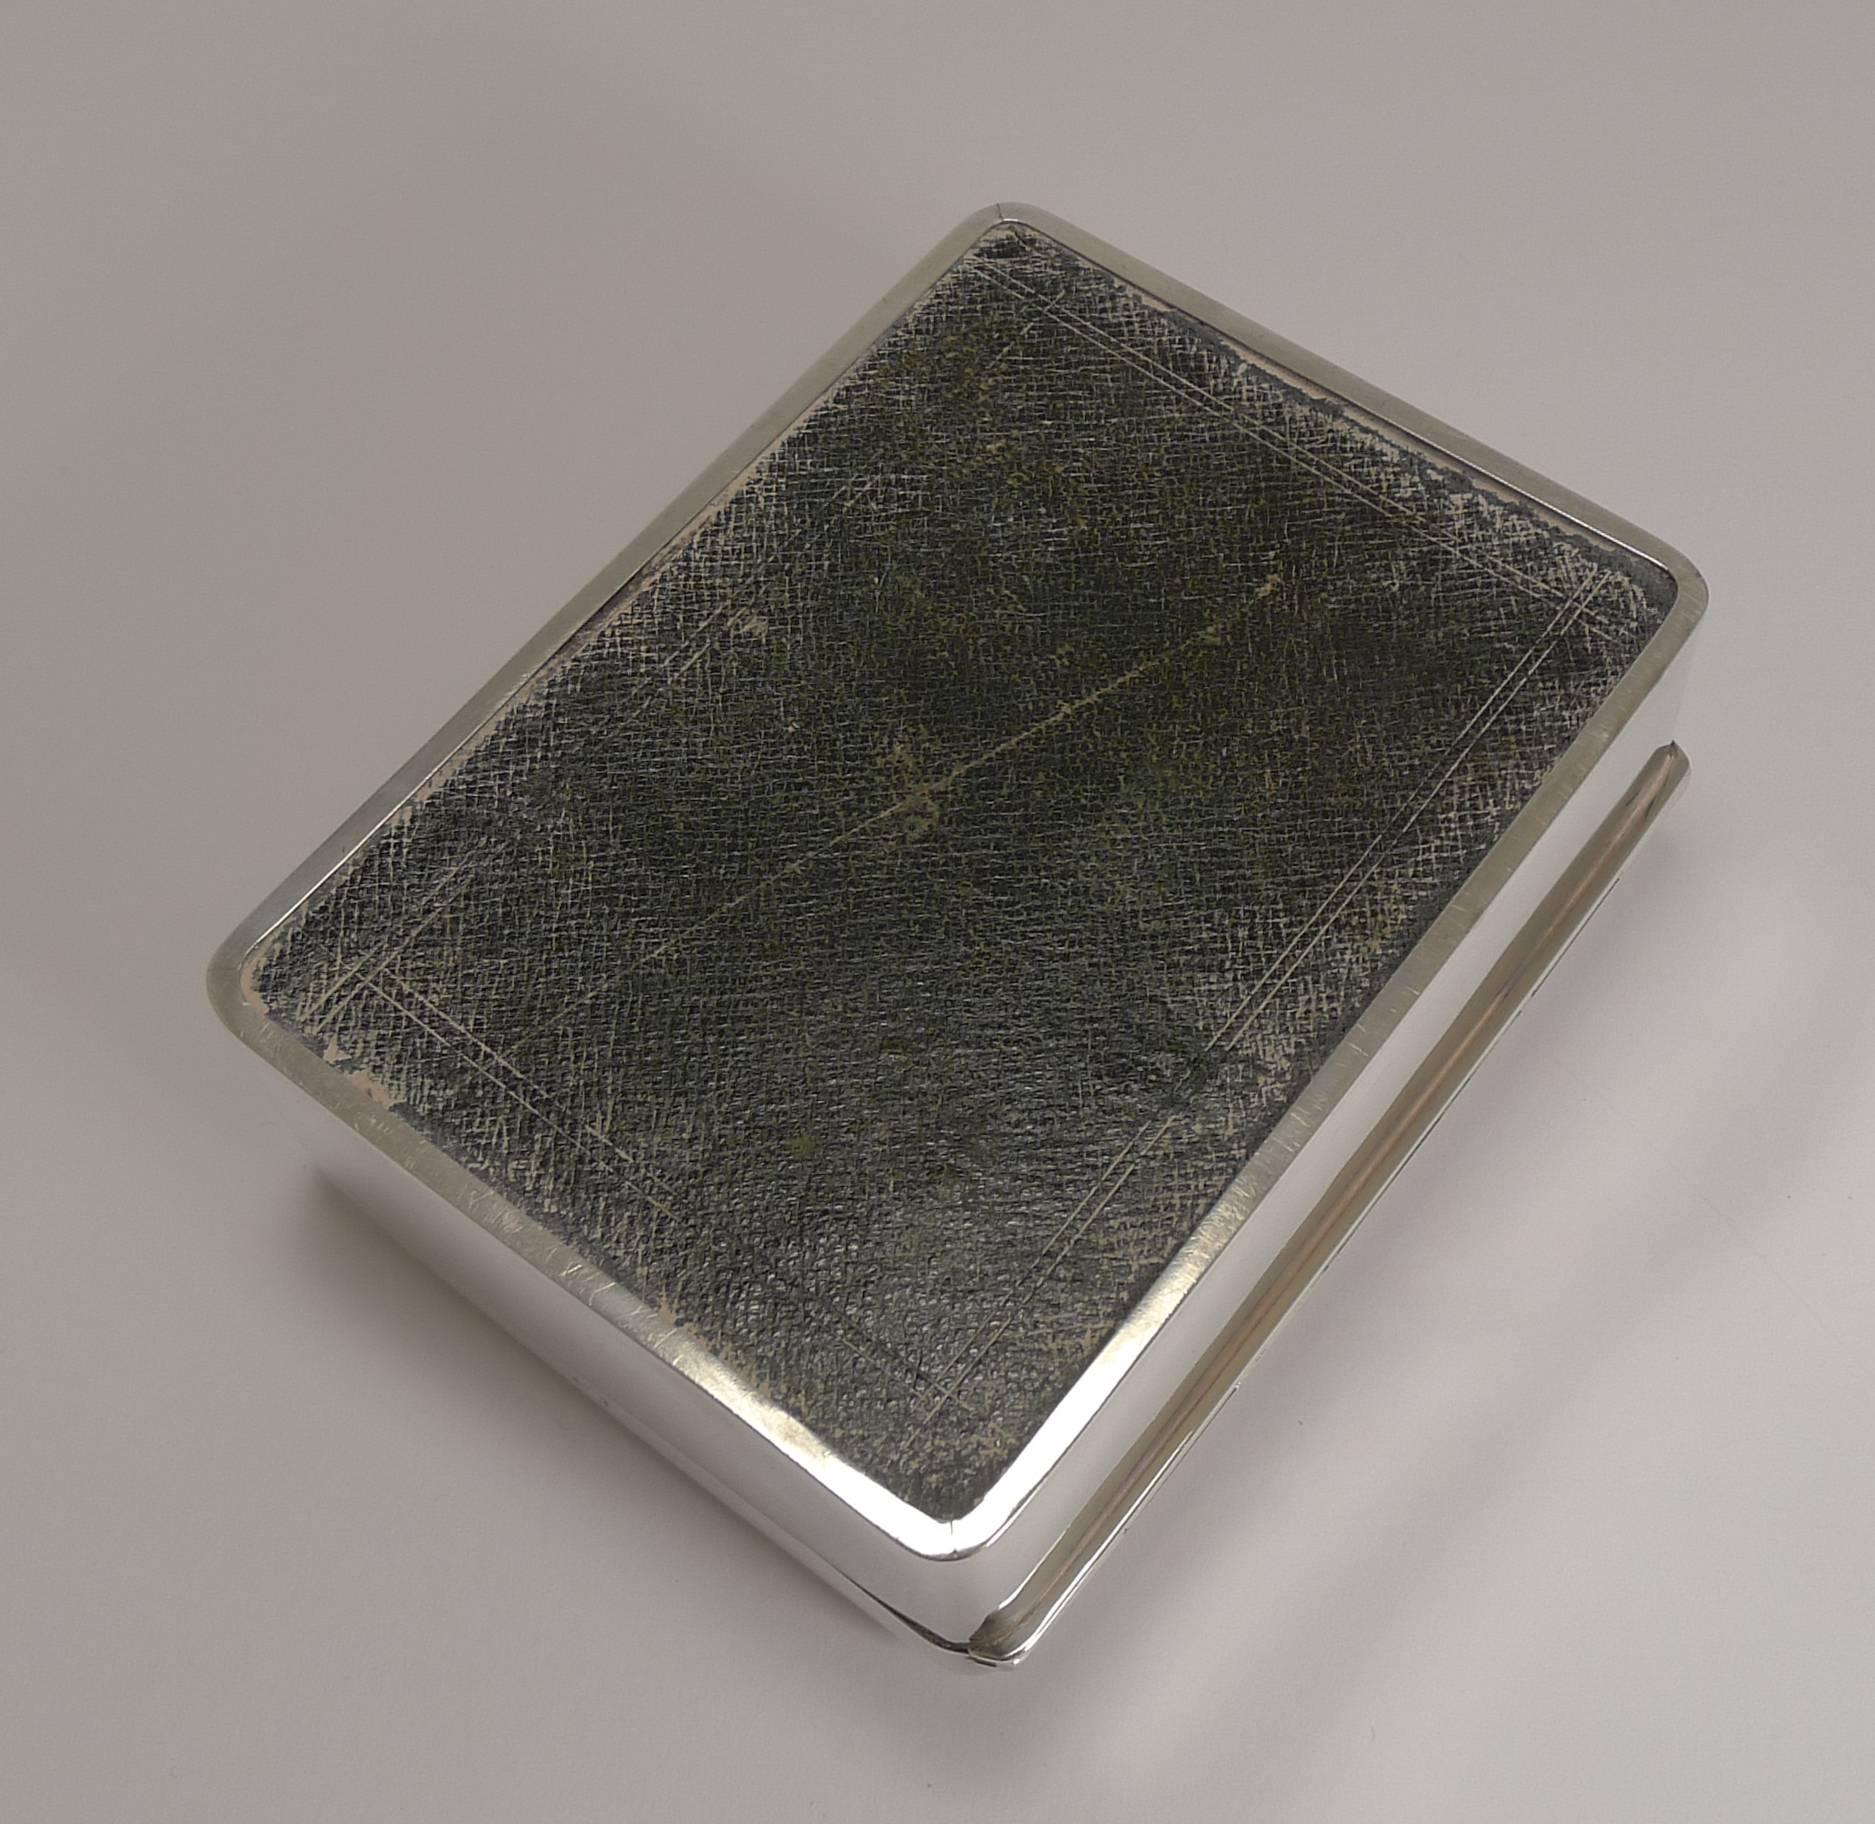 Early 20th Century Antique English Sterling Silver Bridge / Playing Card Box, 1903